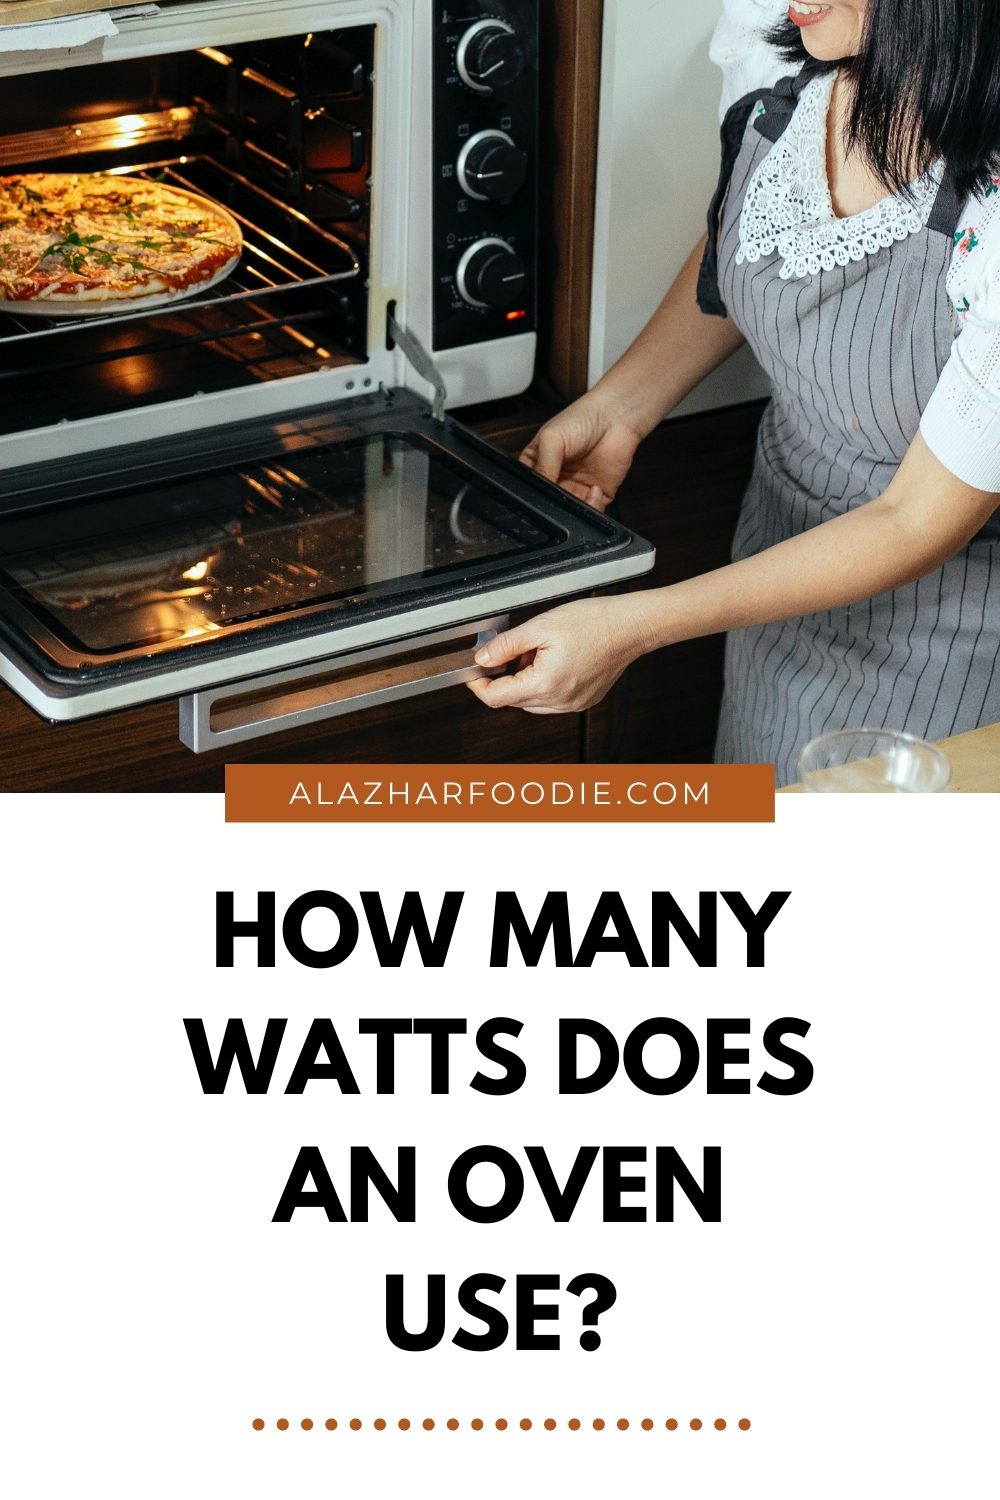 How many amps does a single oven use?